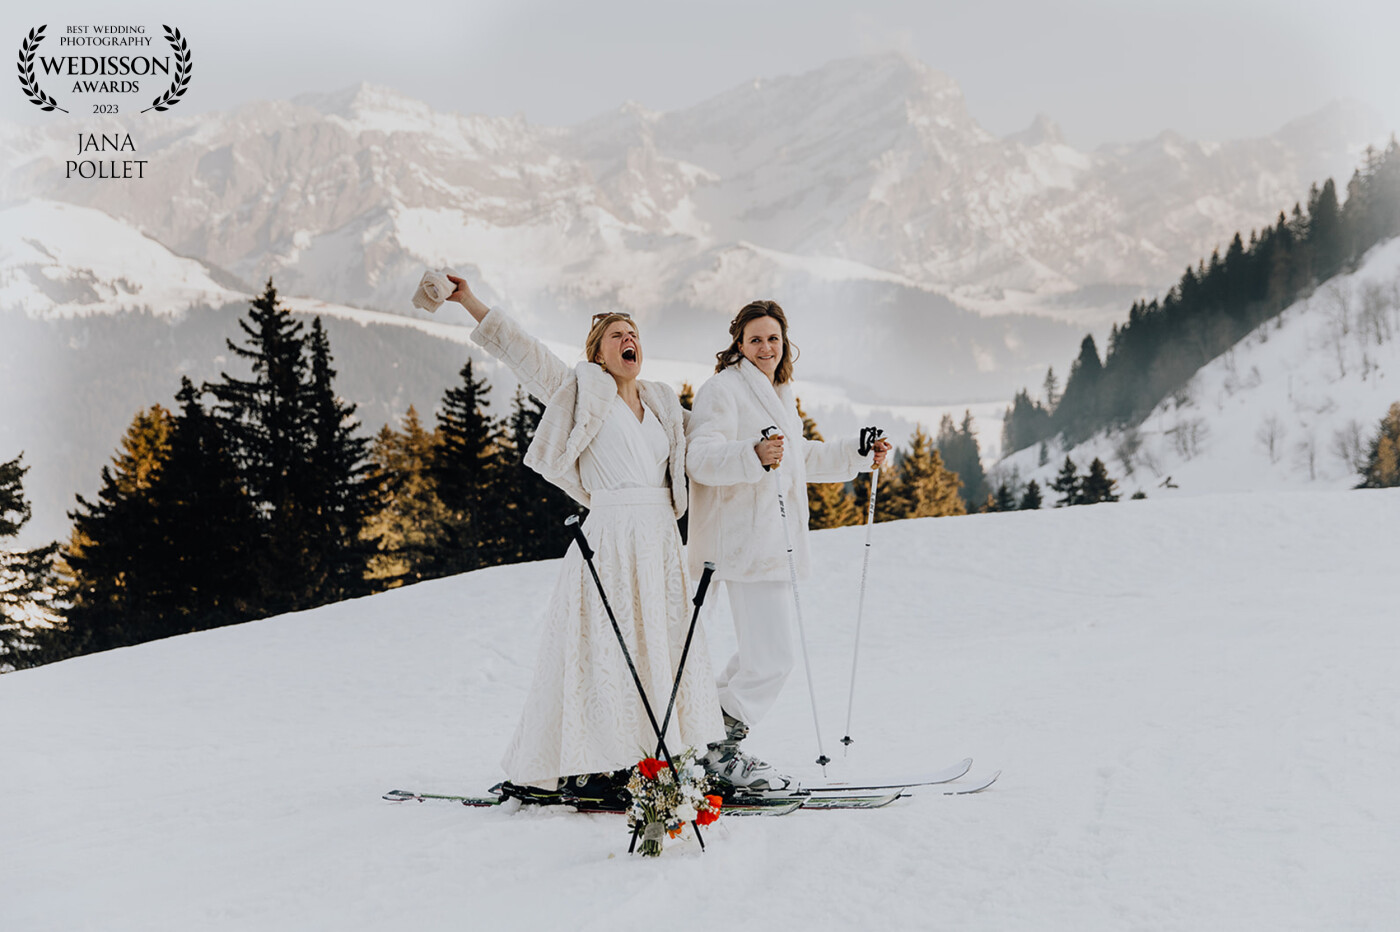 I was lucky enough to go to Switzerland with Sophie and Florence, where we had a fantastic time in the mountains. Taking wedding photos on the skis is something I will remember for the rest of my life, it was a real challenge.